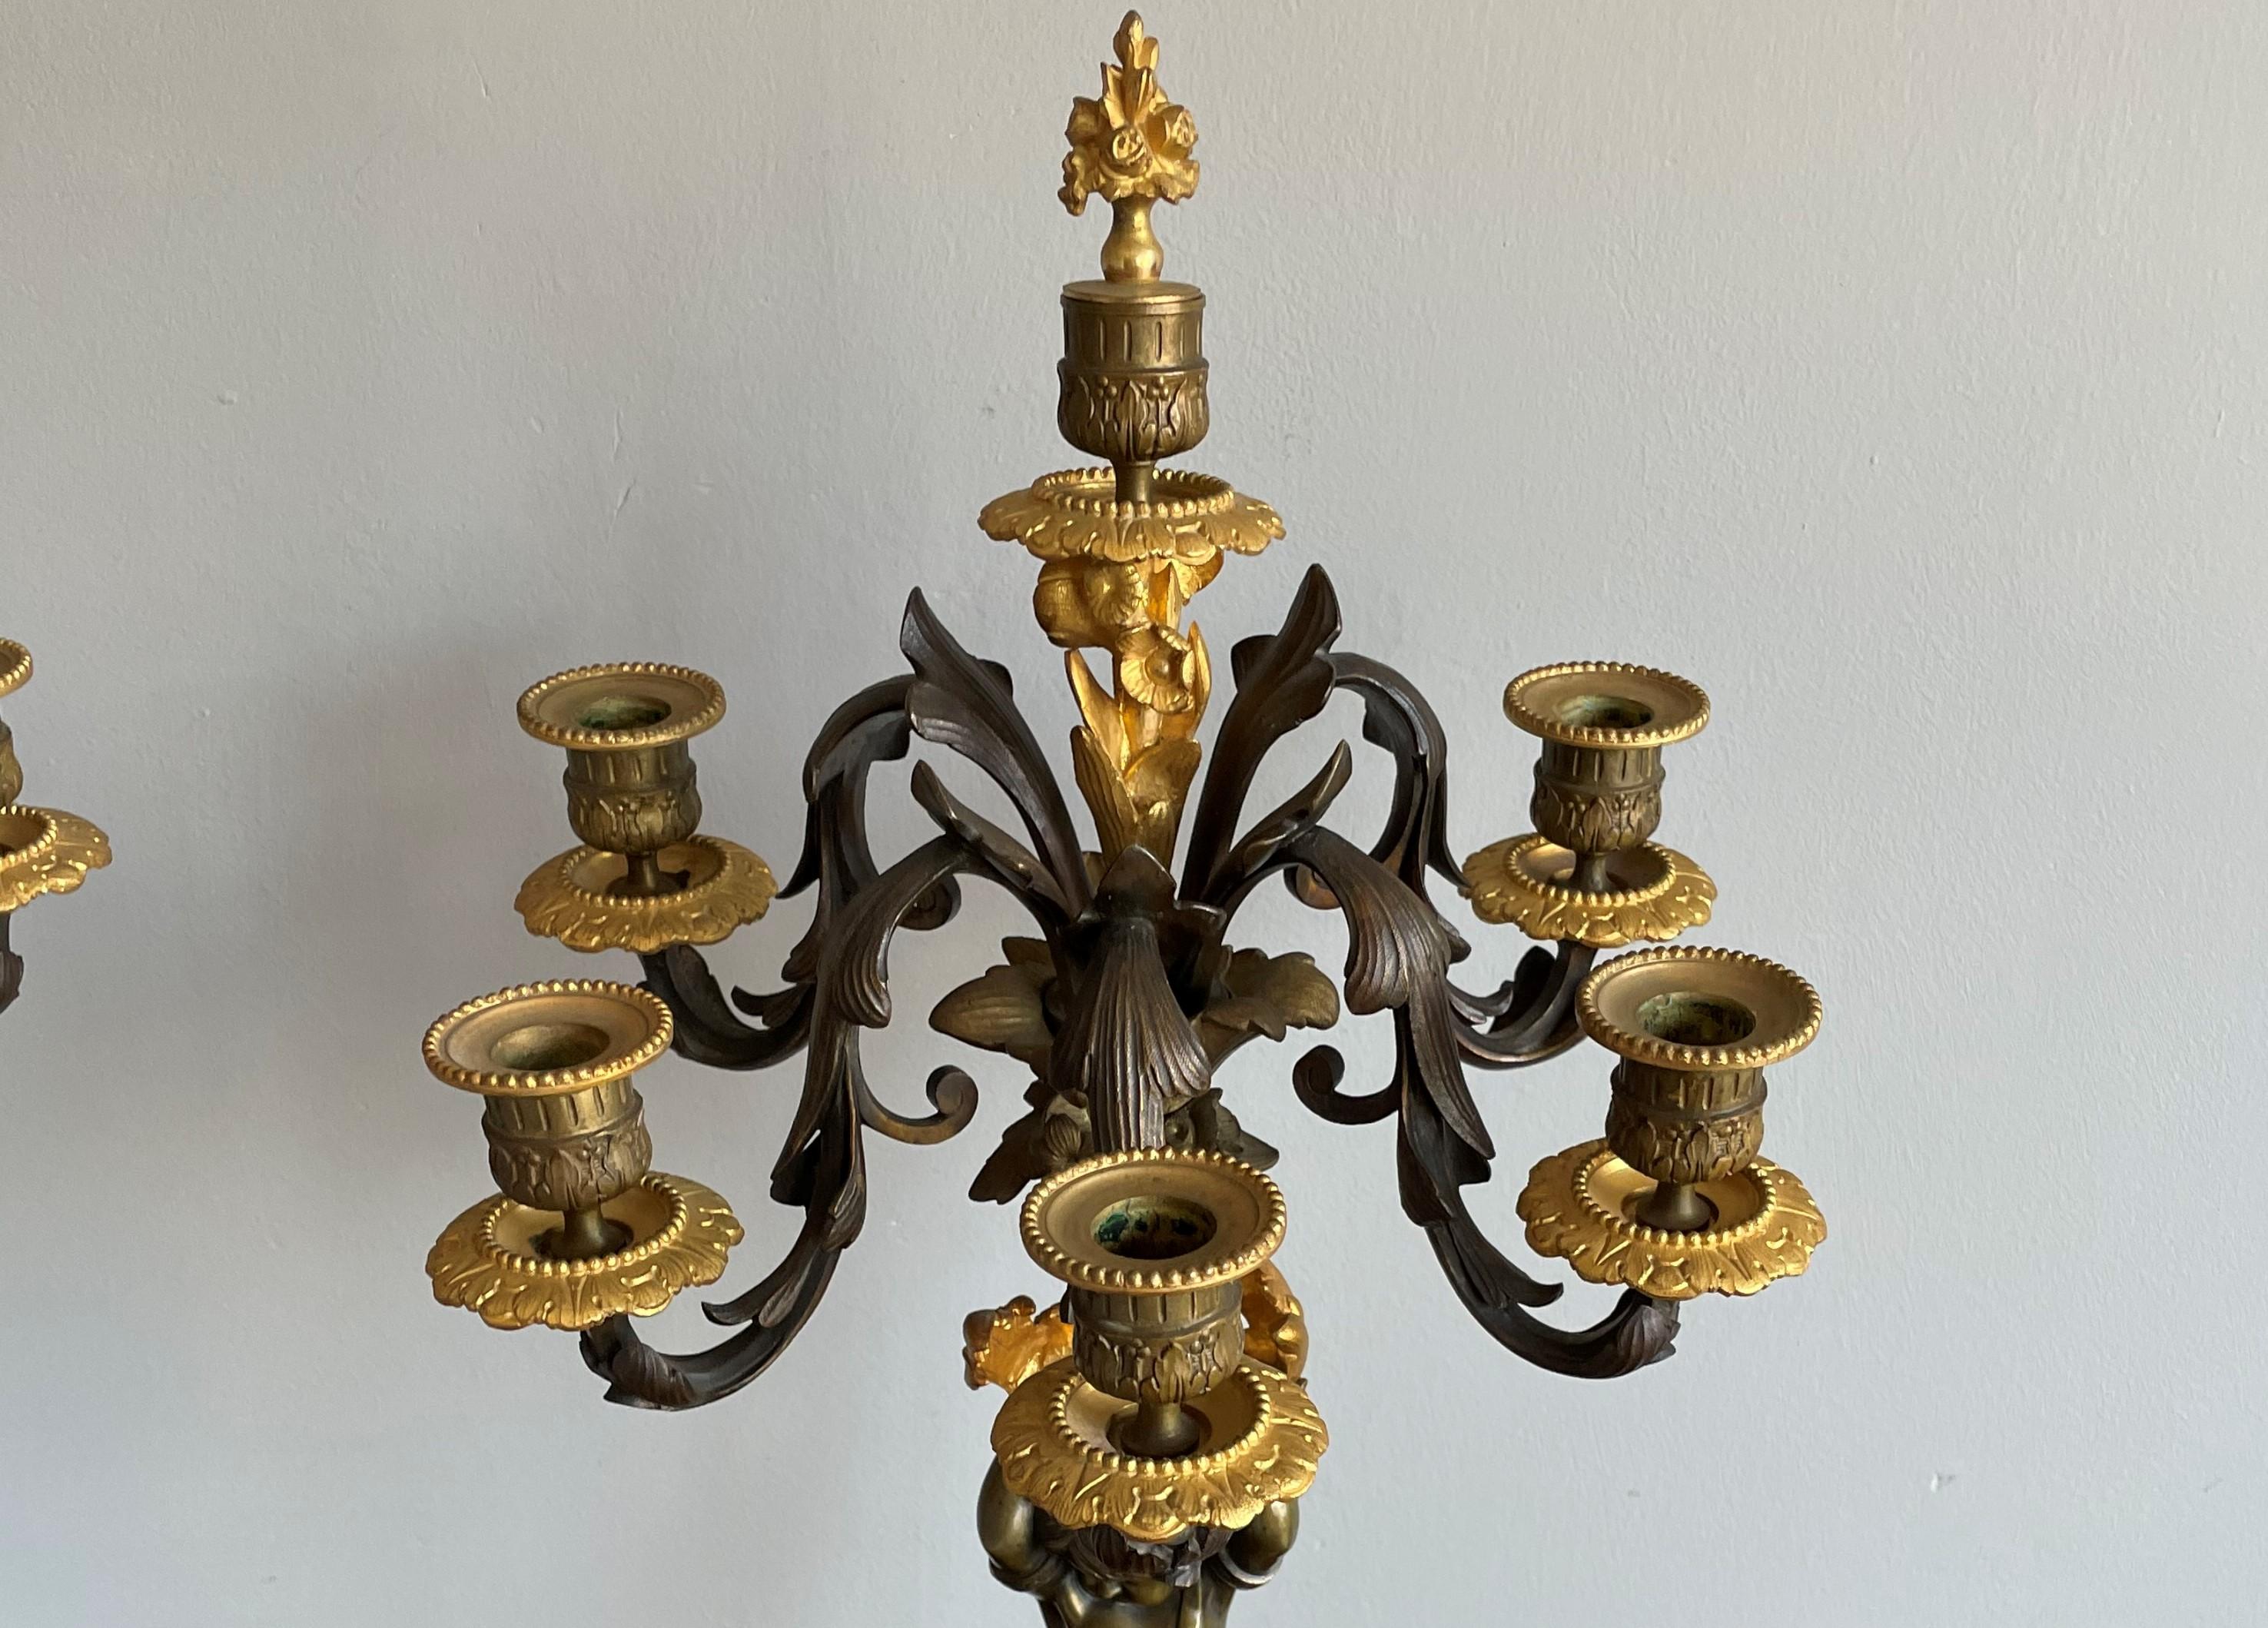 Stunning Pair of French Louis XVI Style Gilt Bronze & Marble Candle Candelabras For Sale 6